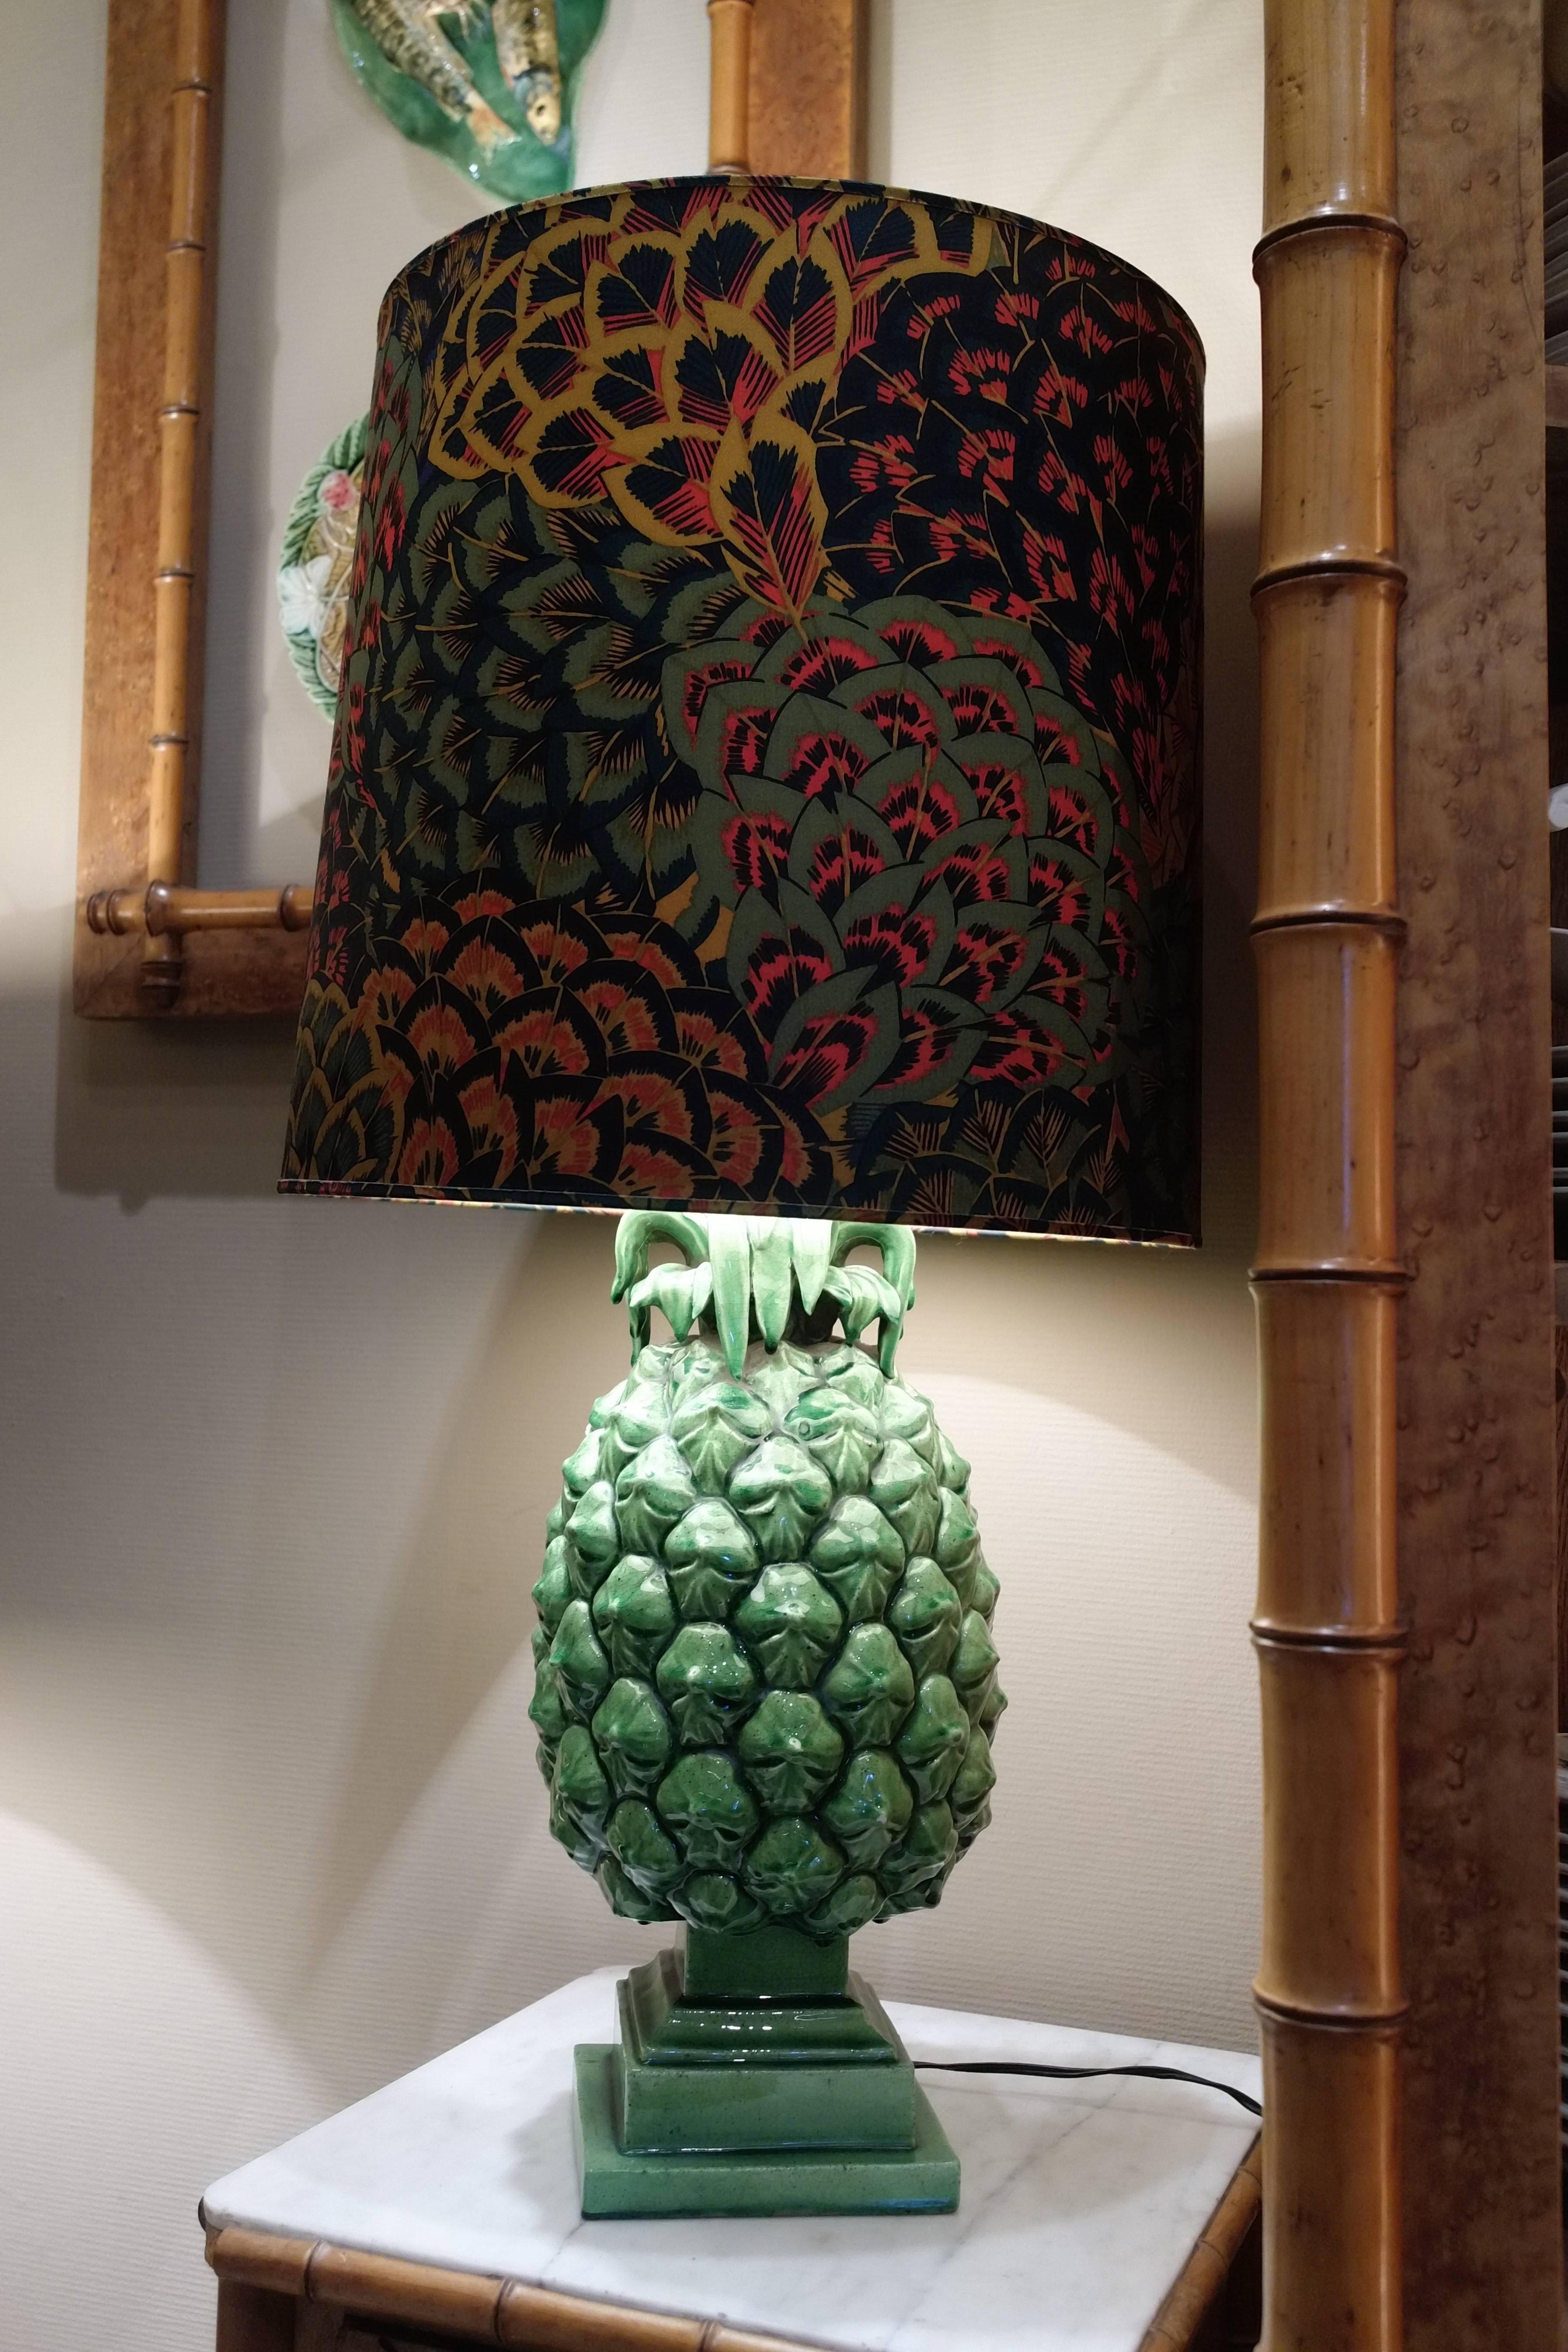 Pair of two fantastic table lamps in the shape of two green pineapples.
Made of enameled ceramic.
These beautiful lamps come from a Brussels mansion (Belgium) and are in perfect condition.

The lampshades are included.

(Height without the